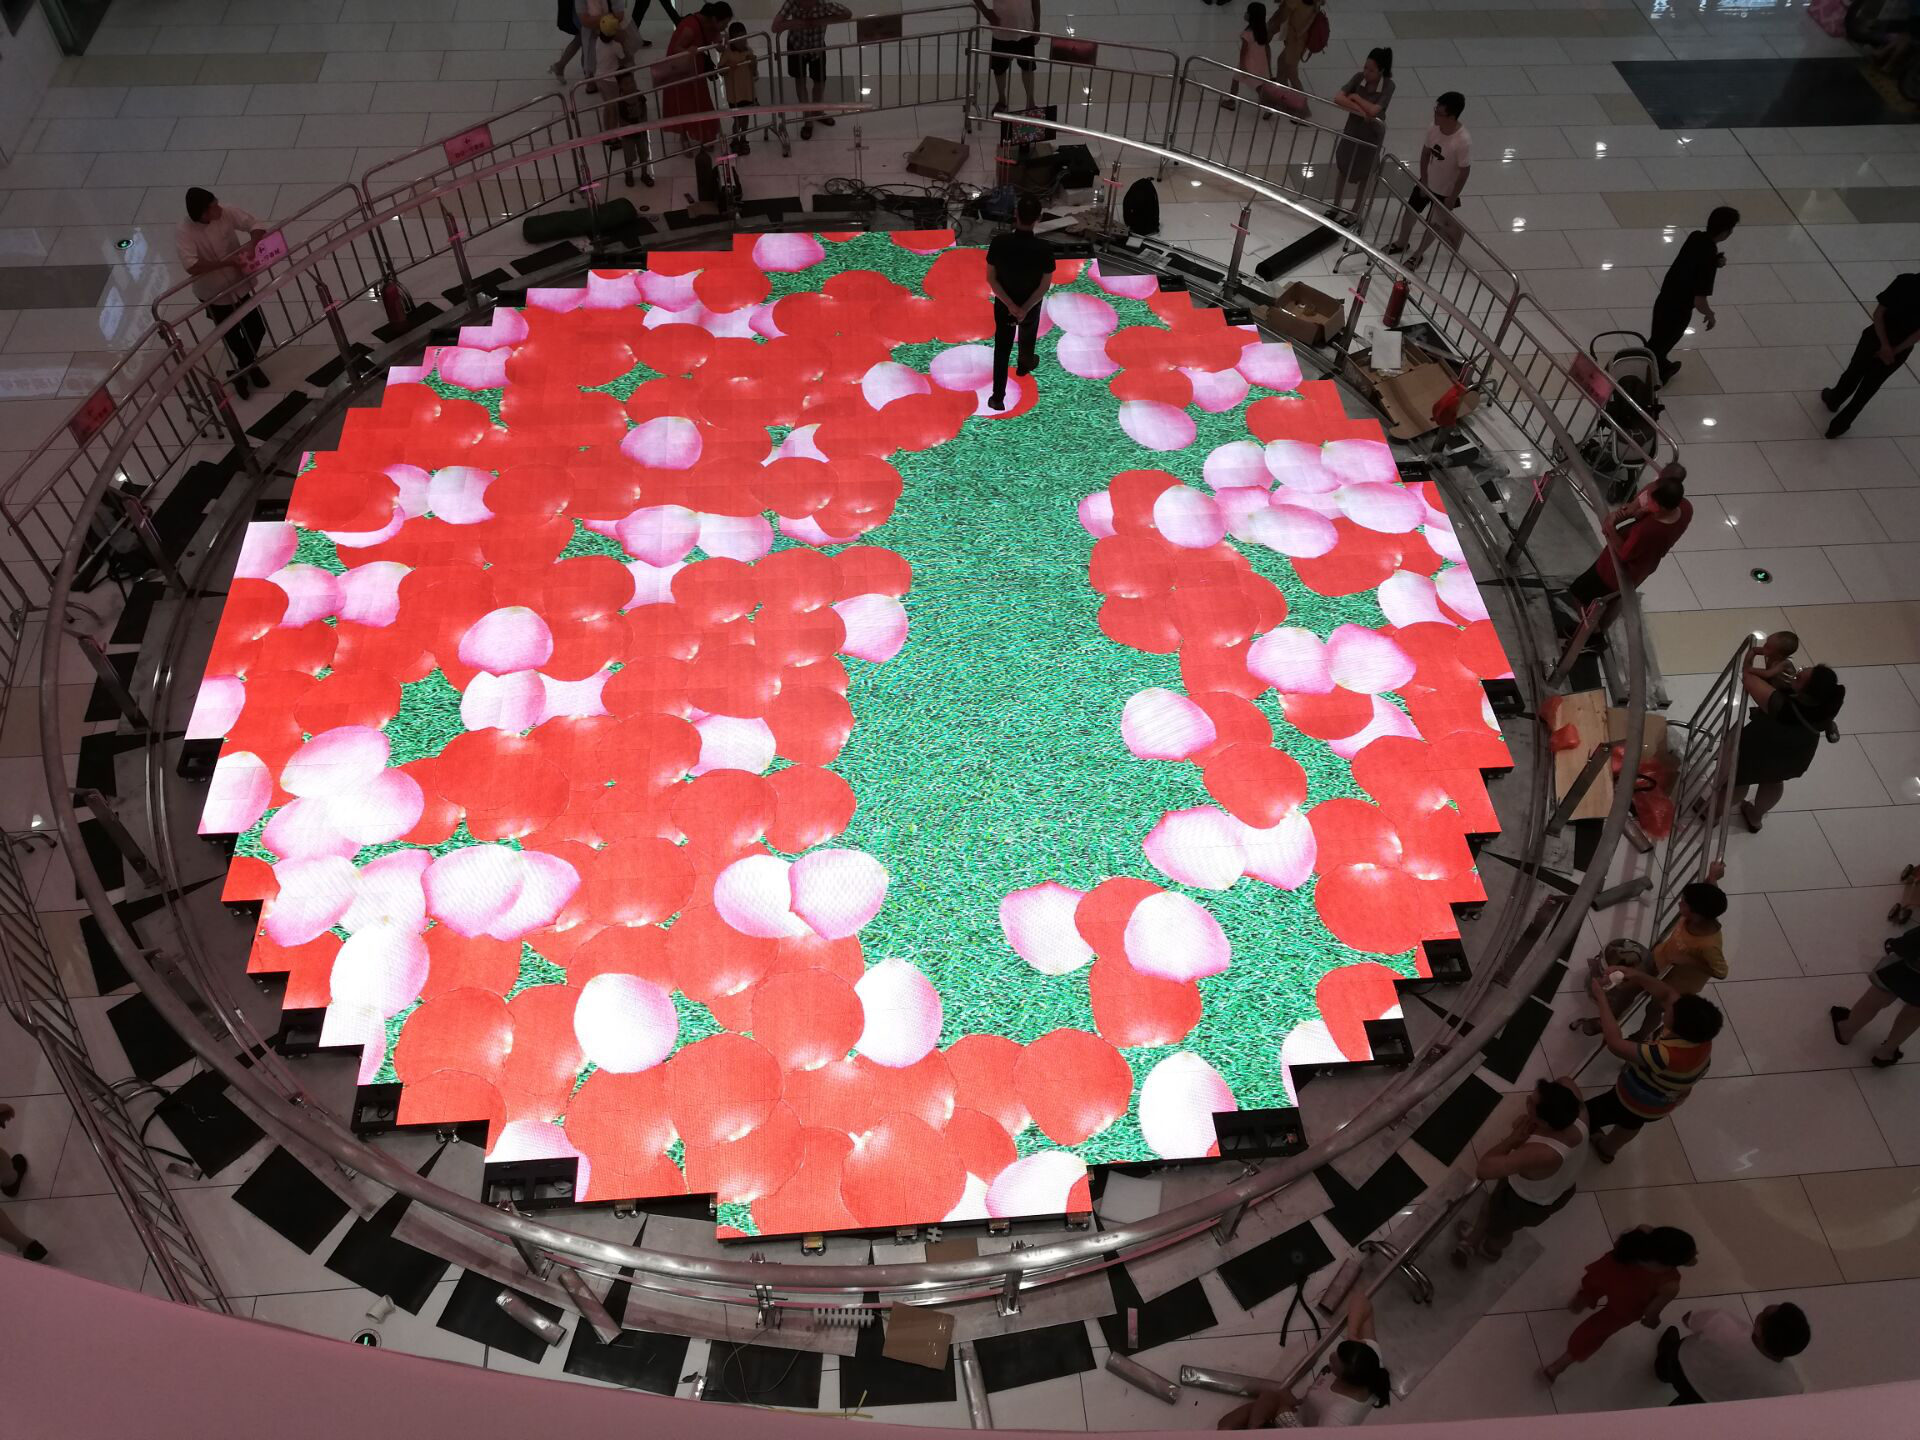 The first intelligent interactive floor screen in Beihai, Guangxi was unveiled in Ningchun City